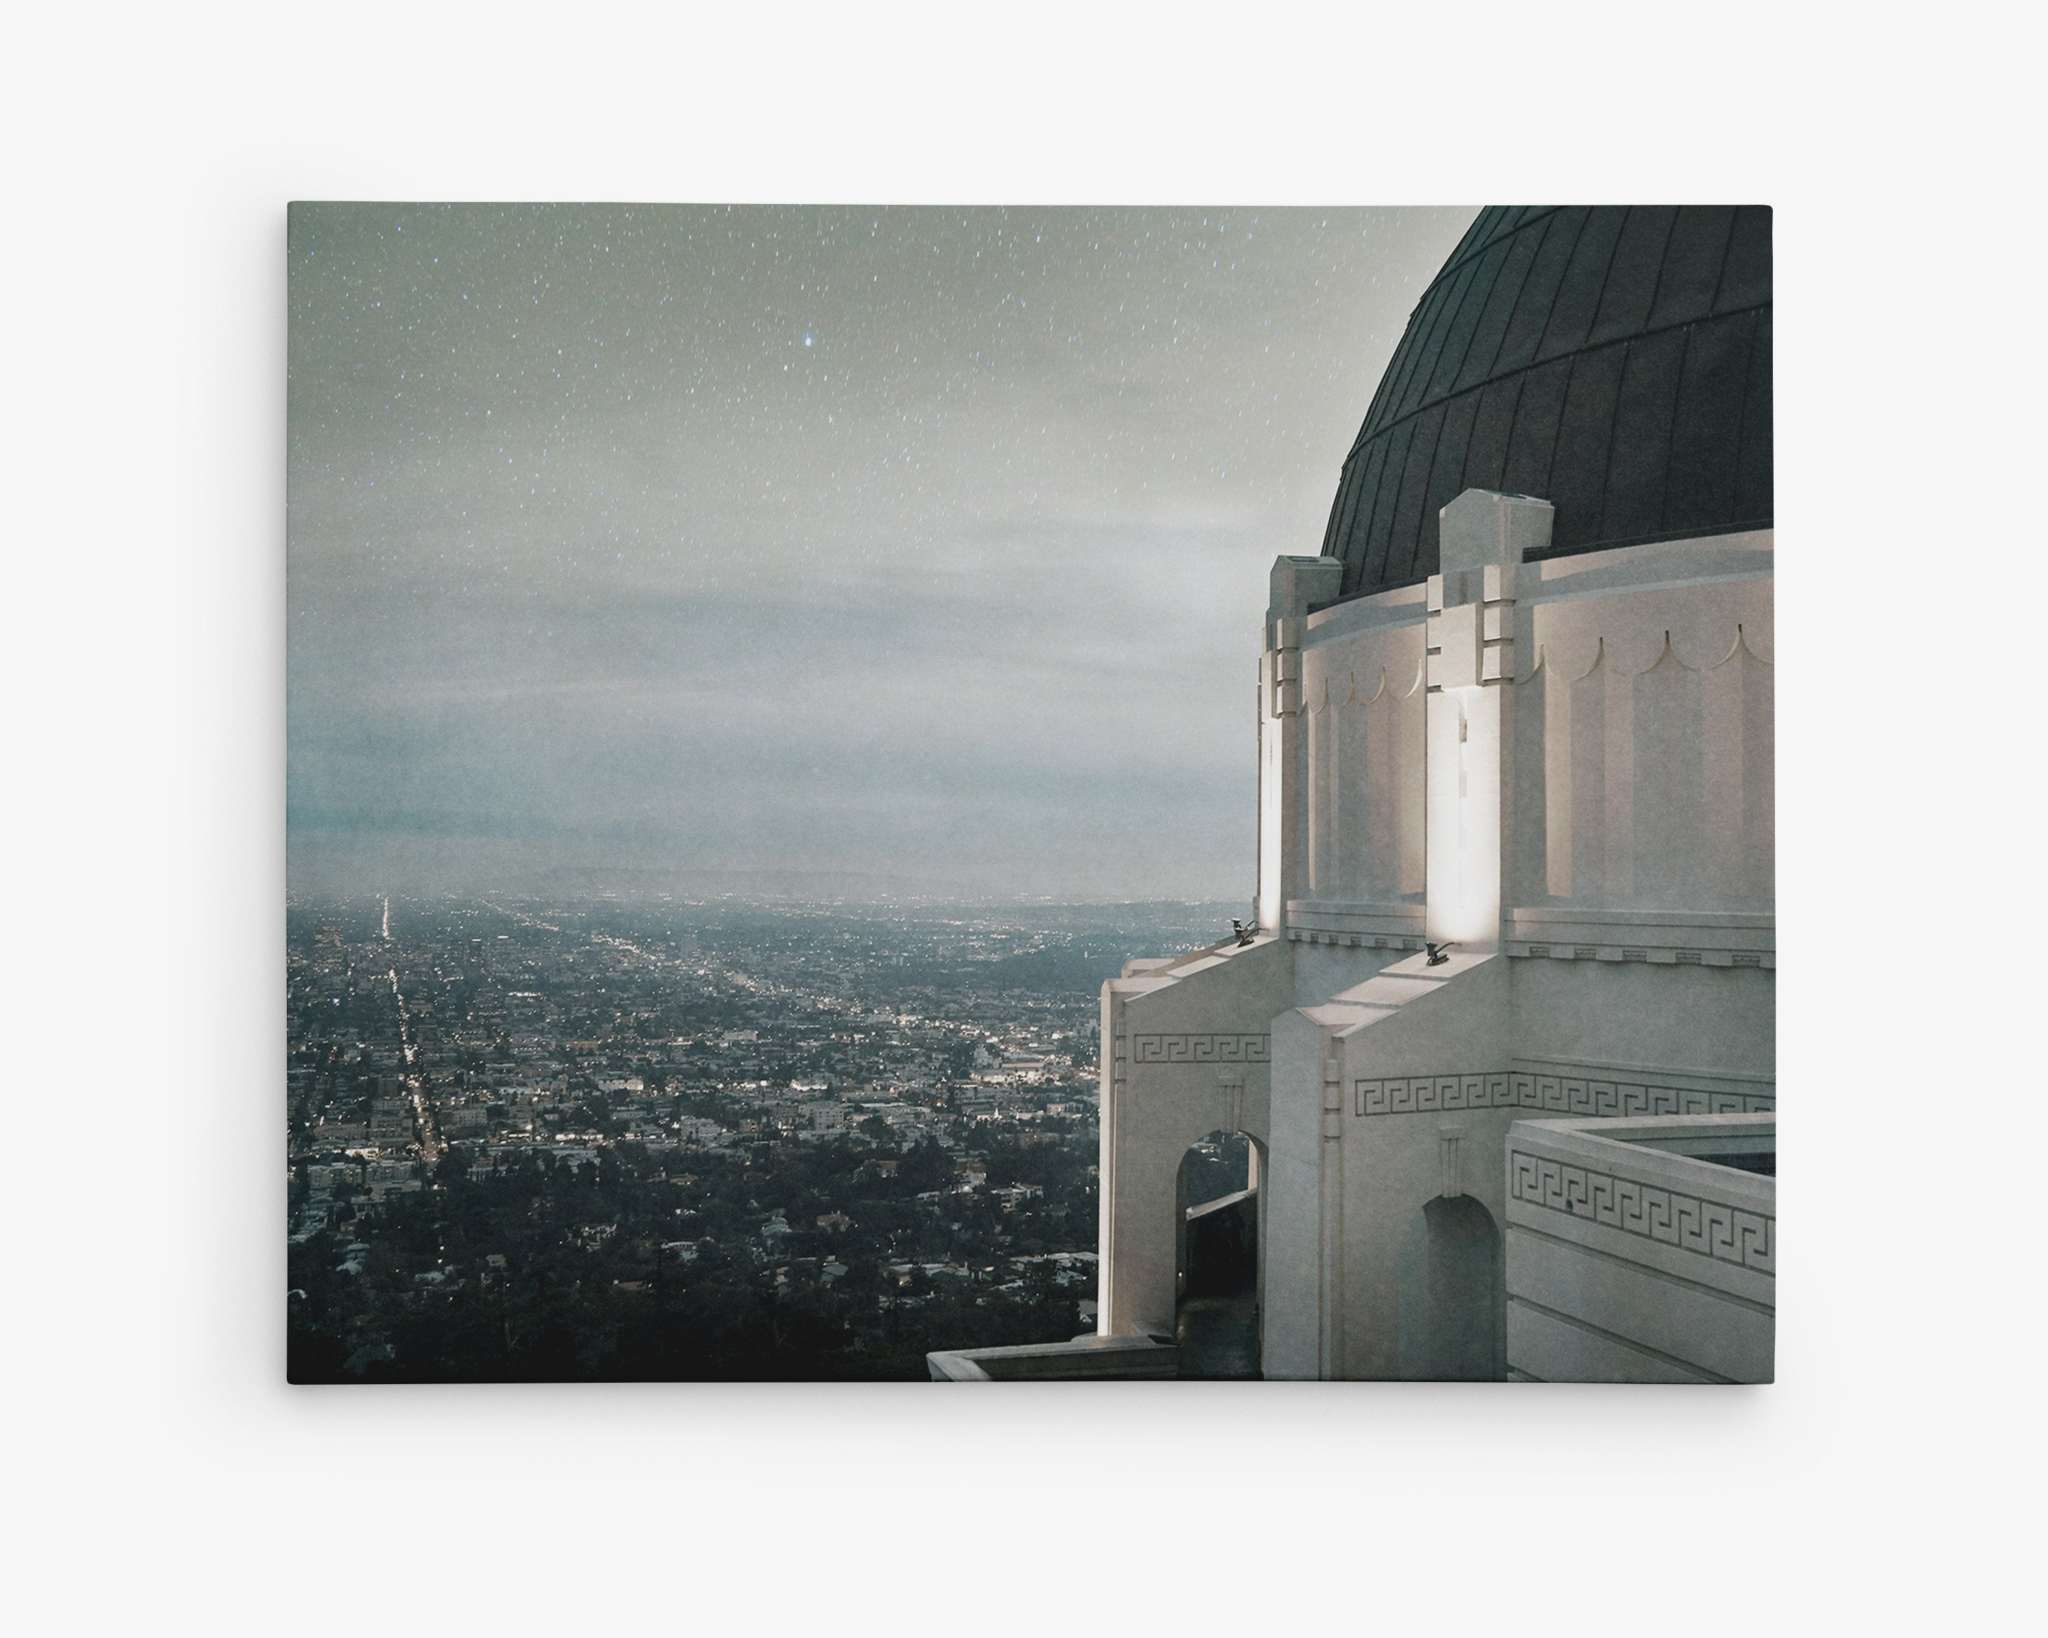 A nighttime City view of Los Angeles from the Griffith Observatory. The observatory's structure is visible on the right, partially illuminated, with the sprawling city lights stretching out below under a starry sky. The horizon is hazy, blending into the night. Perfect for Offley Green's Los Angeles Griffith Observatory Canvas Wall Decor, 'The Sky At Night'.